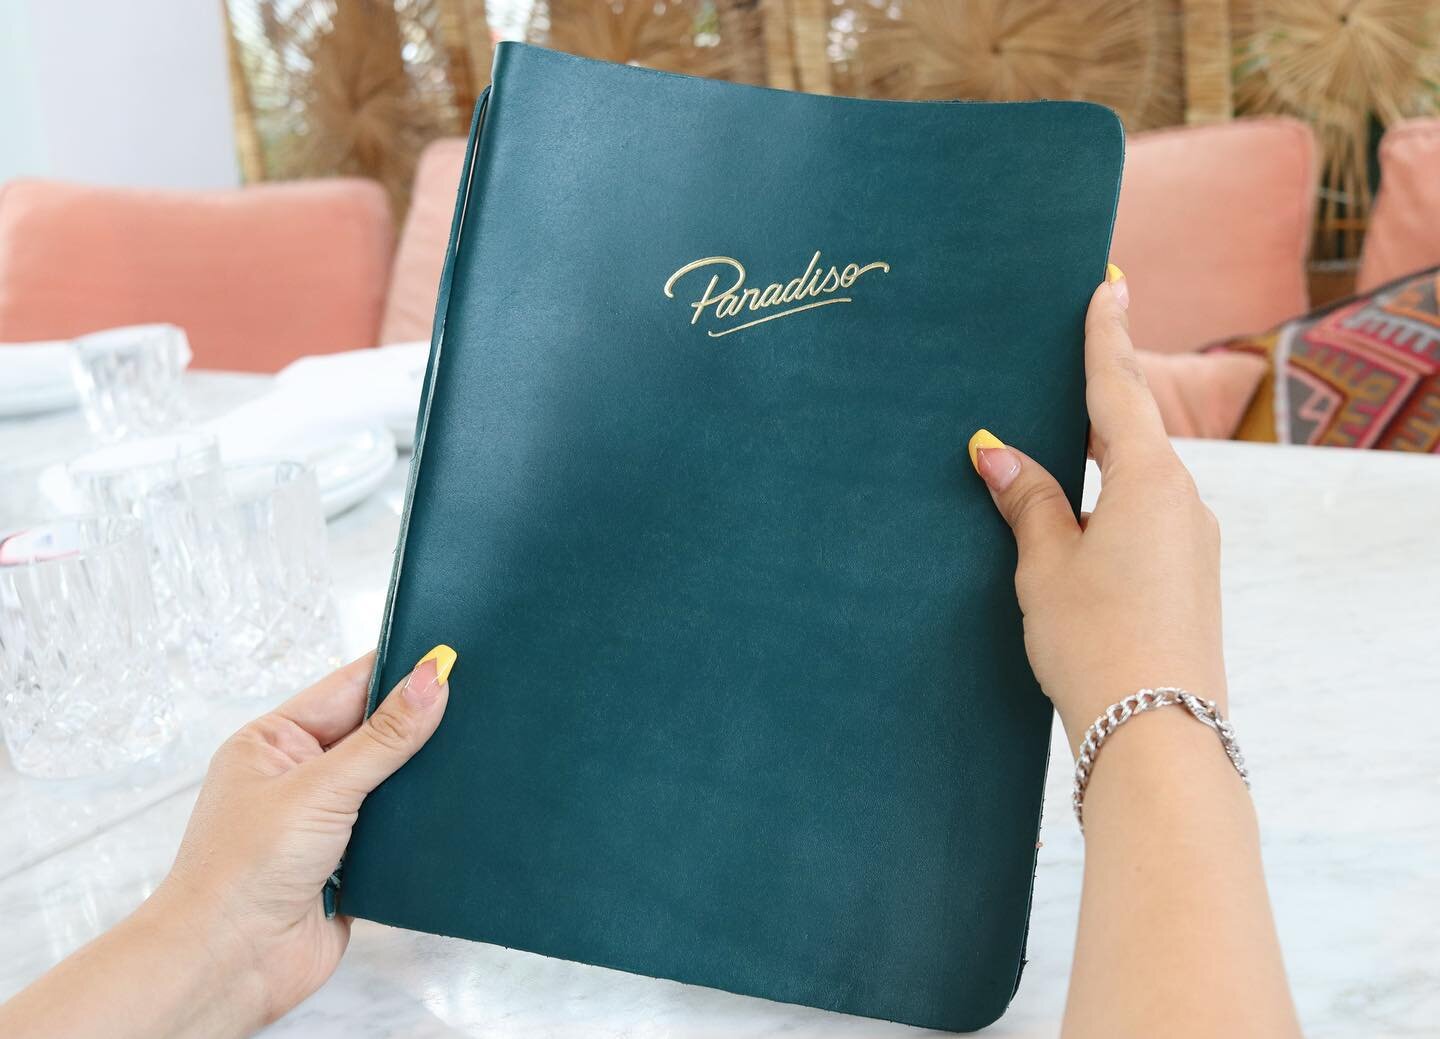 Check out these new gorgeous leather menus! There&rsquo;s nothing we love more than creating vibrant dishes and sharing them with our Paradiso family. Head to our story to see a few of our new favorites!